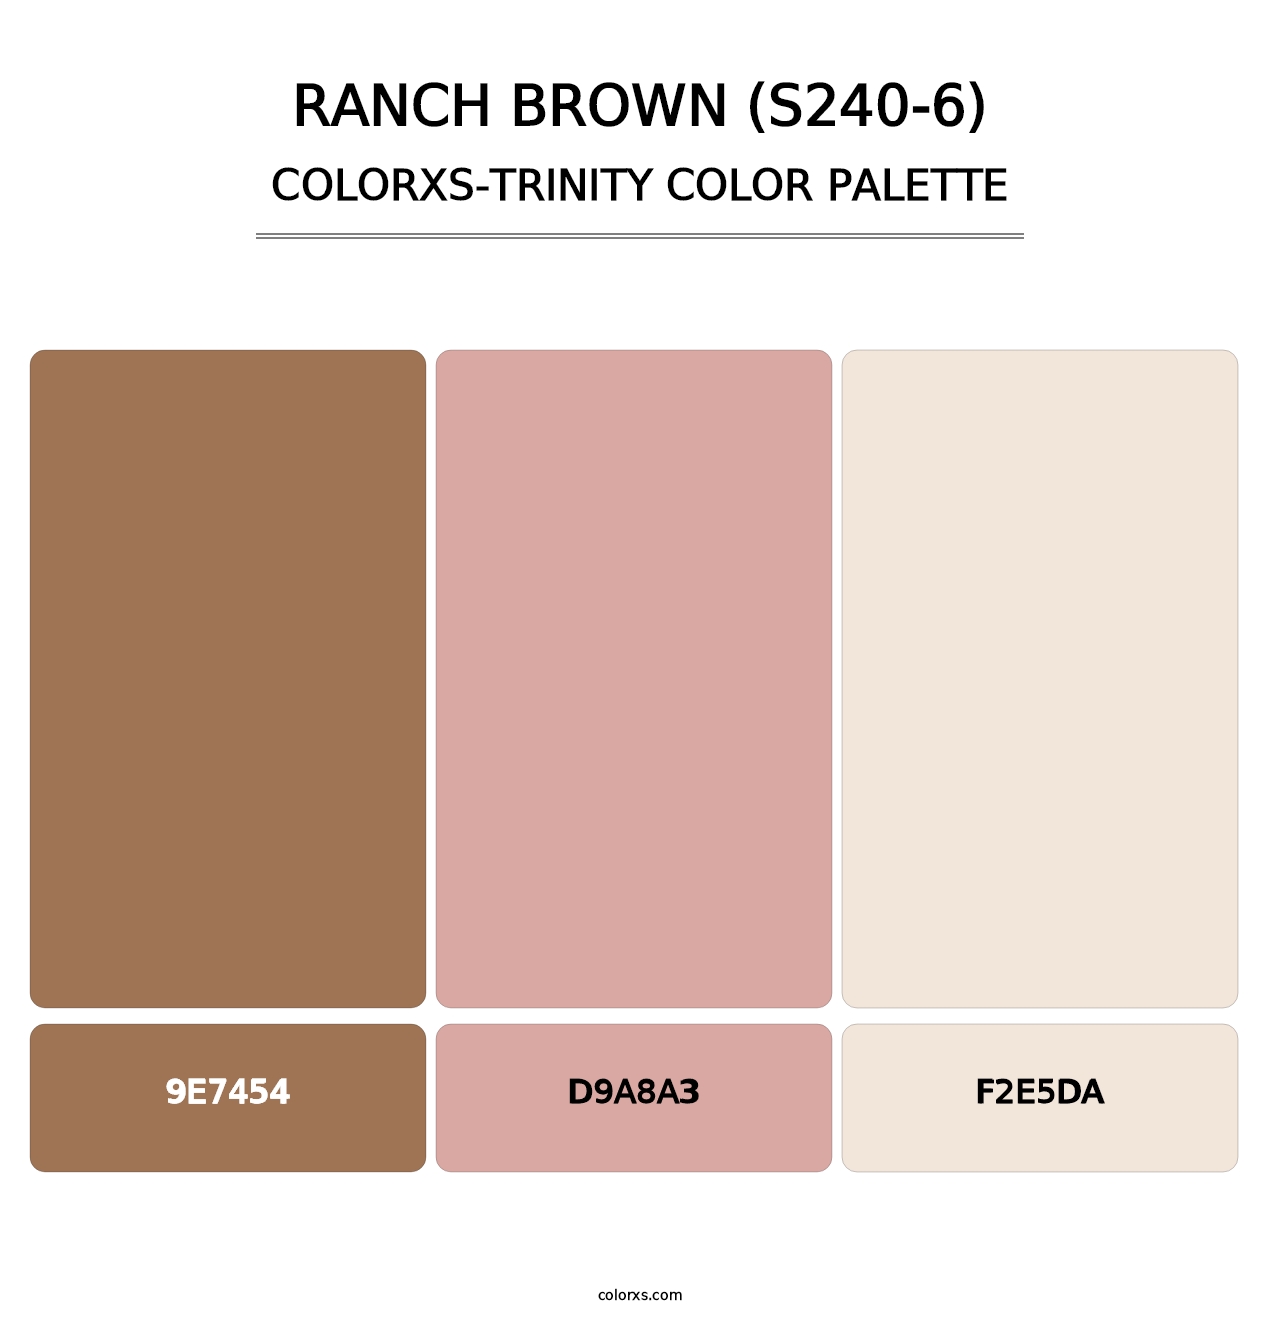 Ranch Brown (S240-6) - Colorxs Trinity Palette